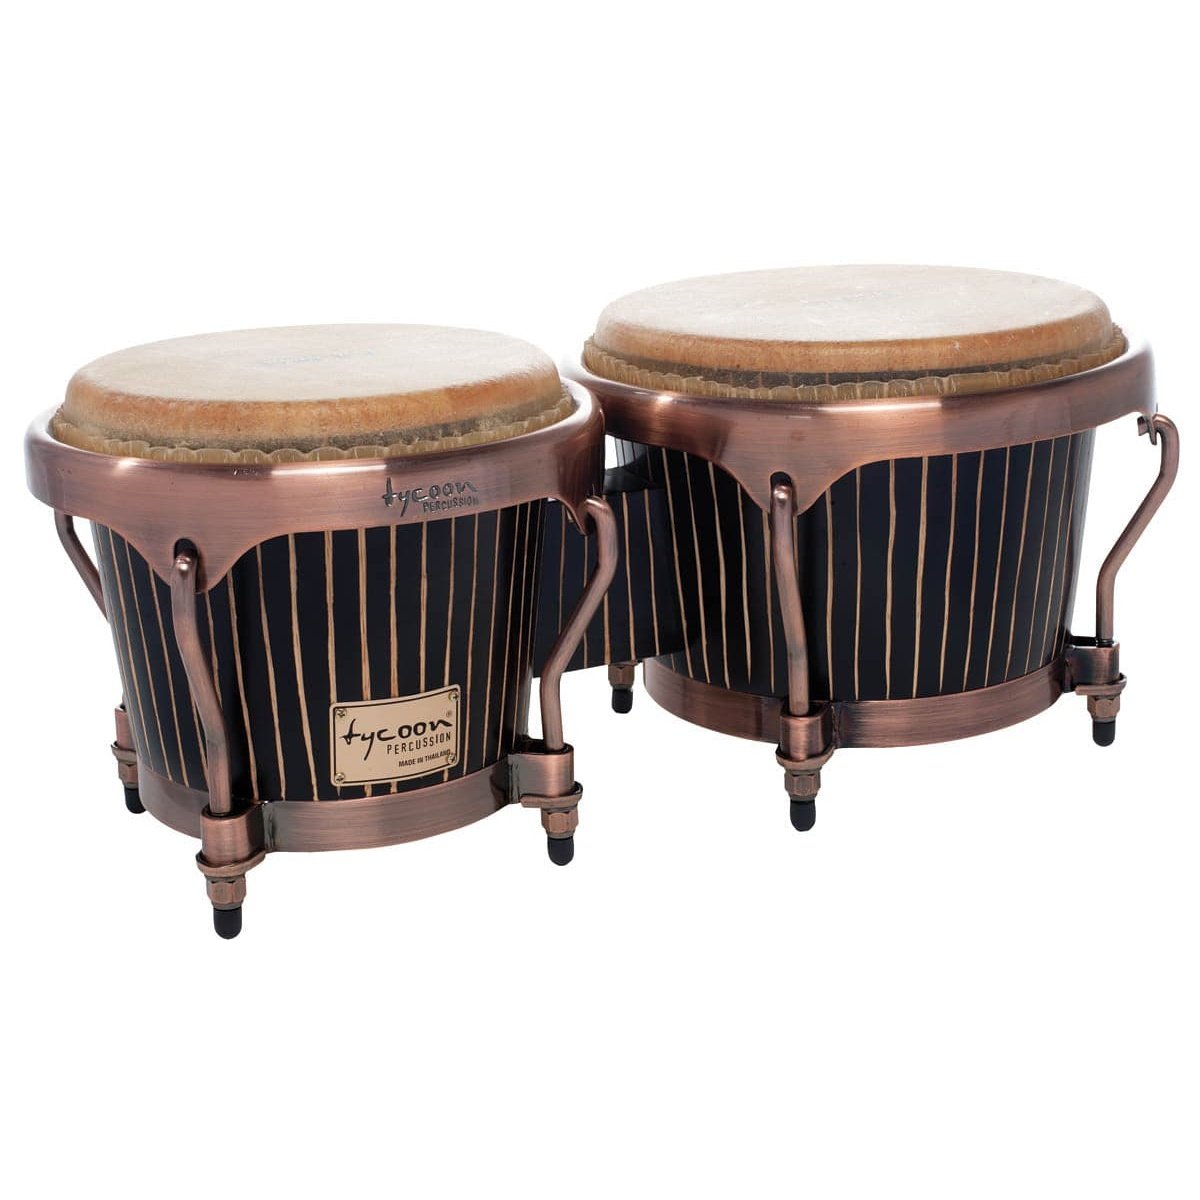 Tycoon Master Hand-crafted Pinstripe Series Bongos